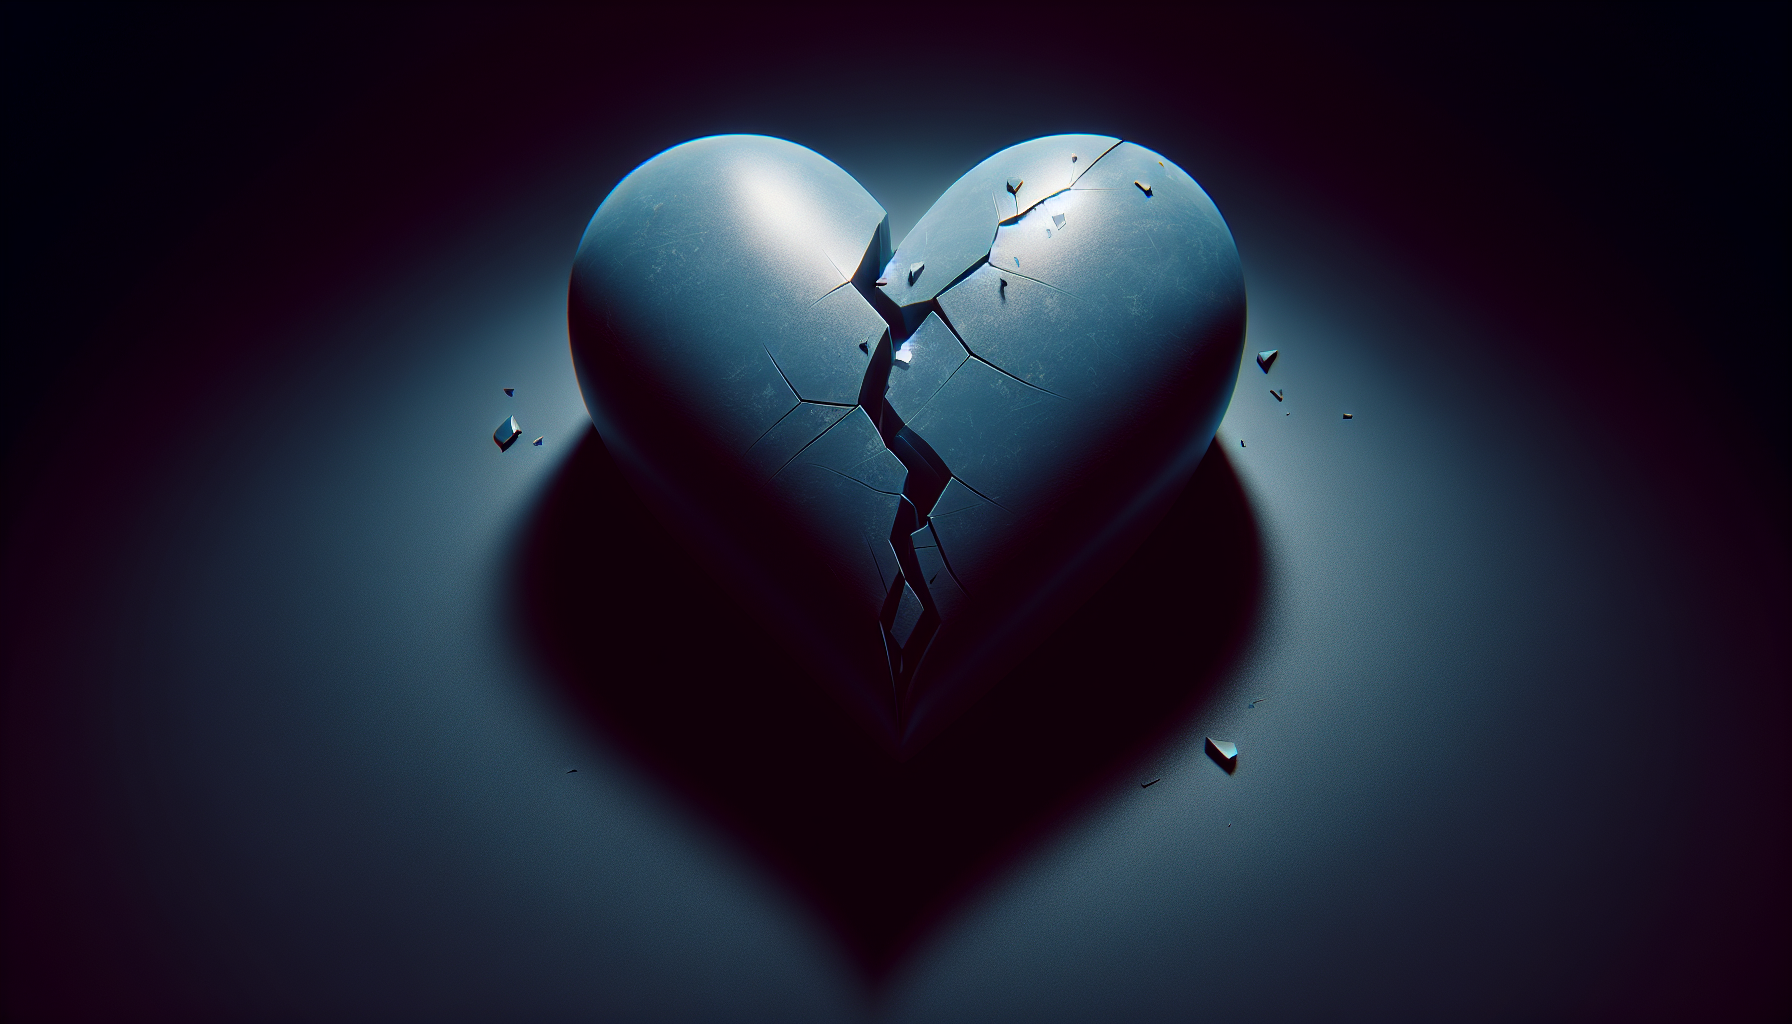 A broken heart symbolizing the emotional pain of romantic rejection